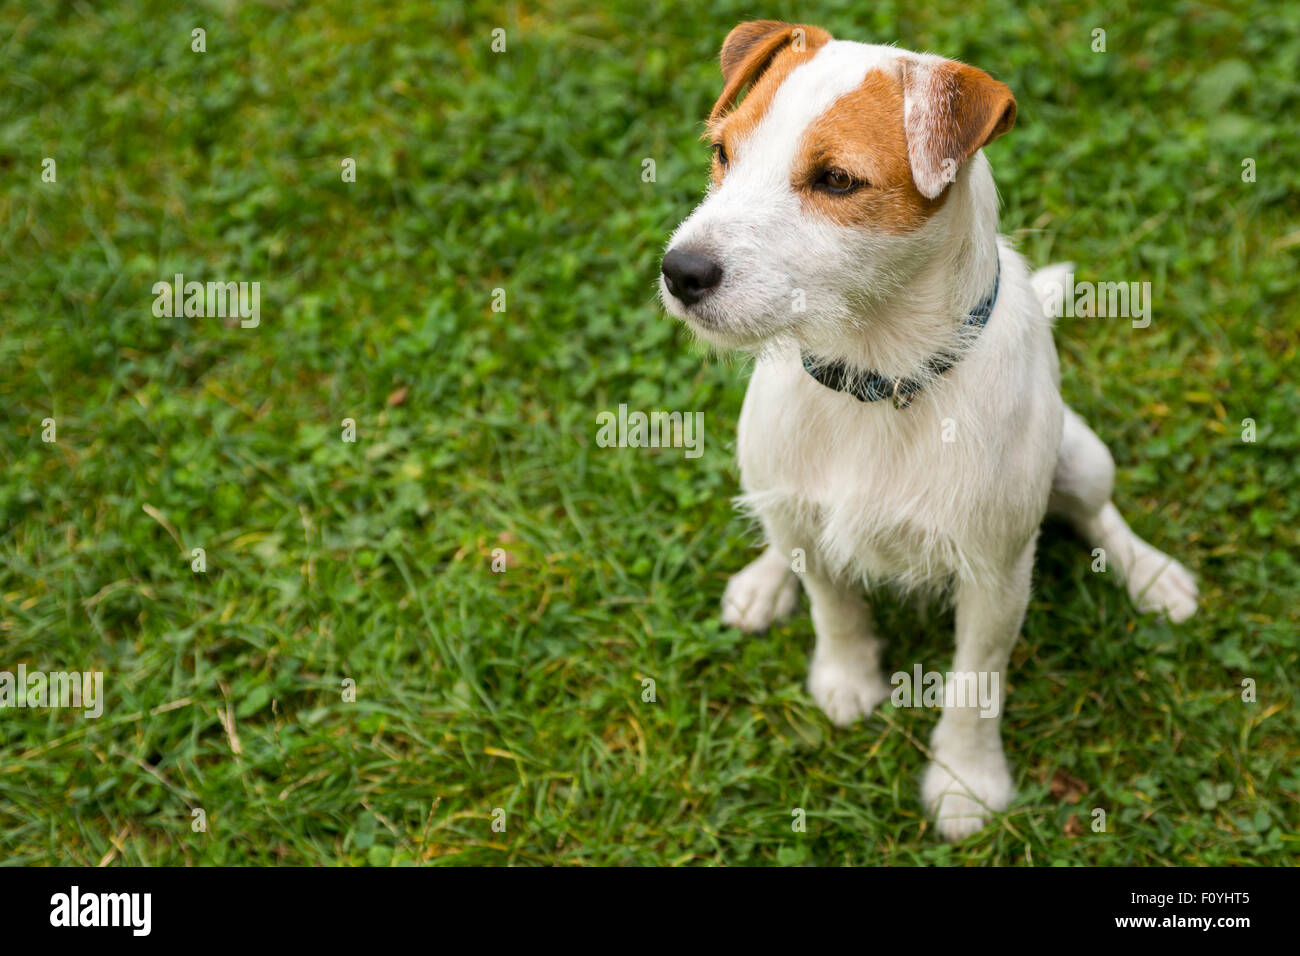 Jack Parson Russell Terrier puppy dog pet, tan rough coated,  outdoors in park while playing Stock Photo